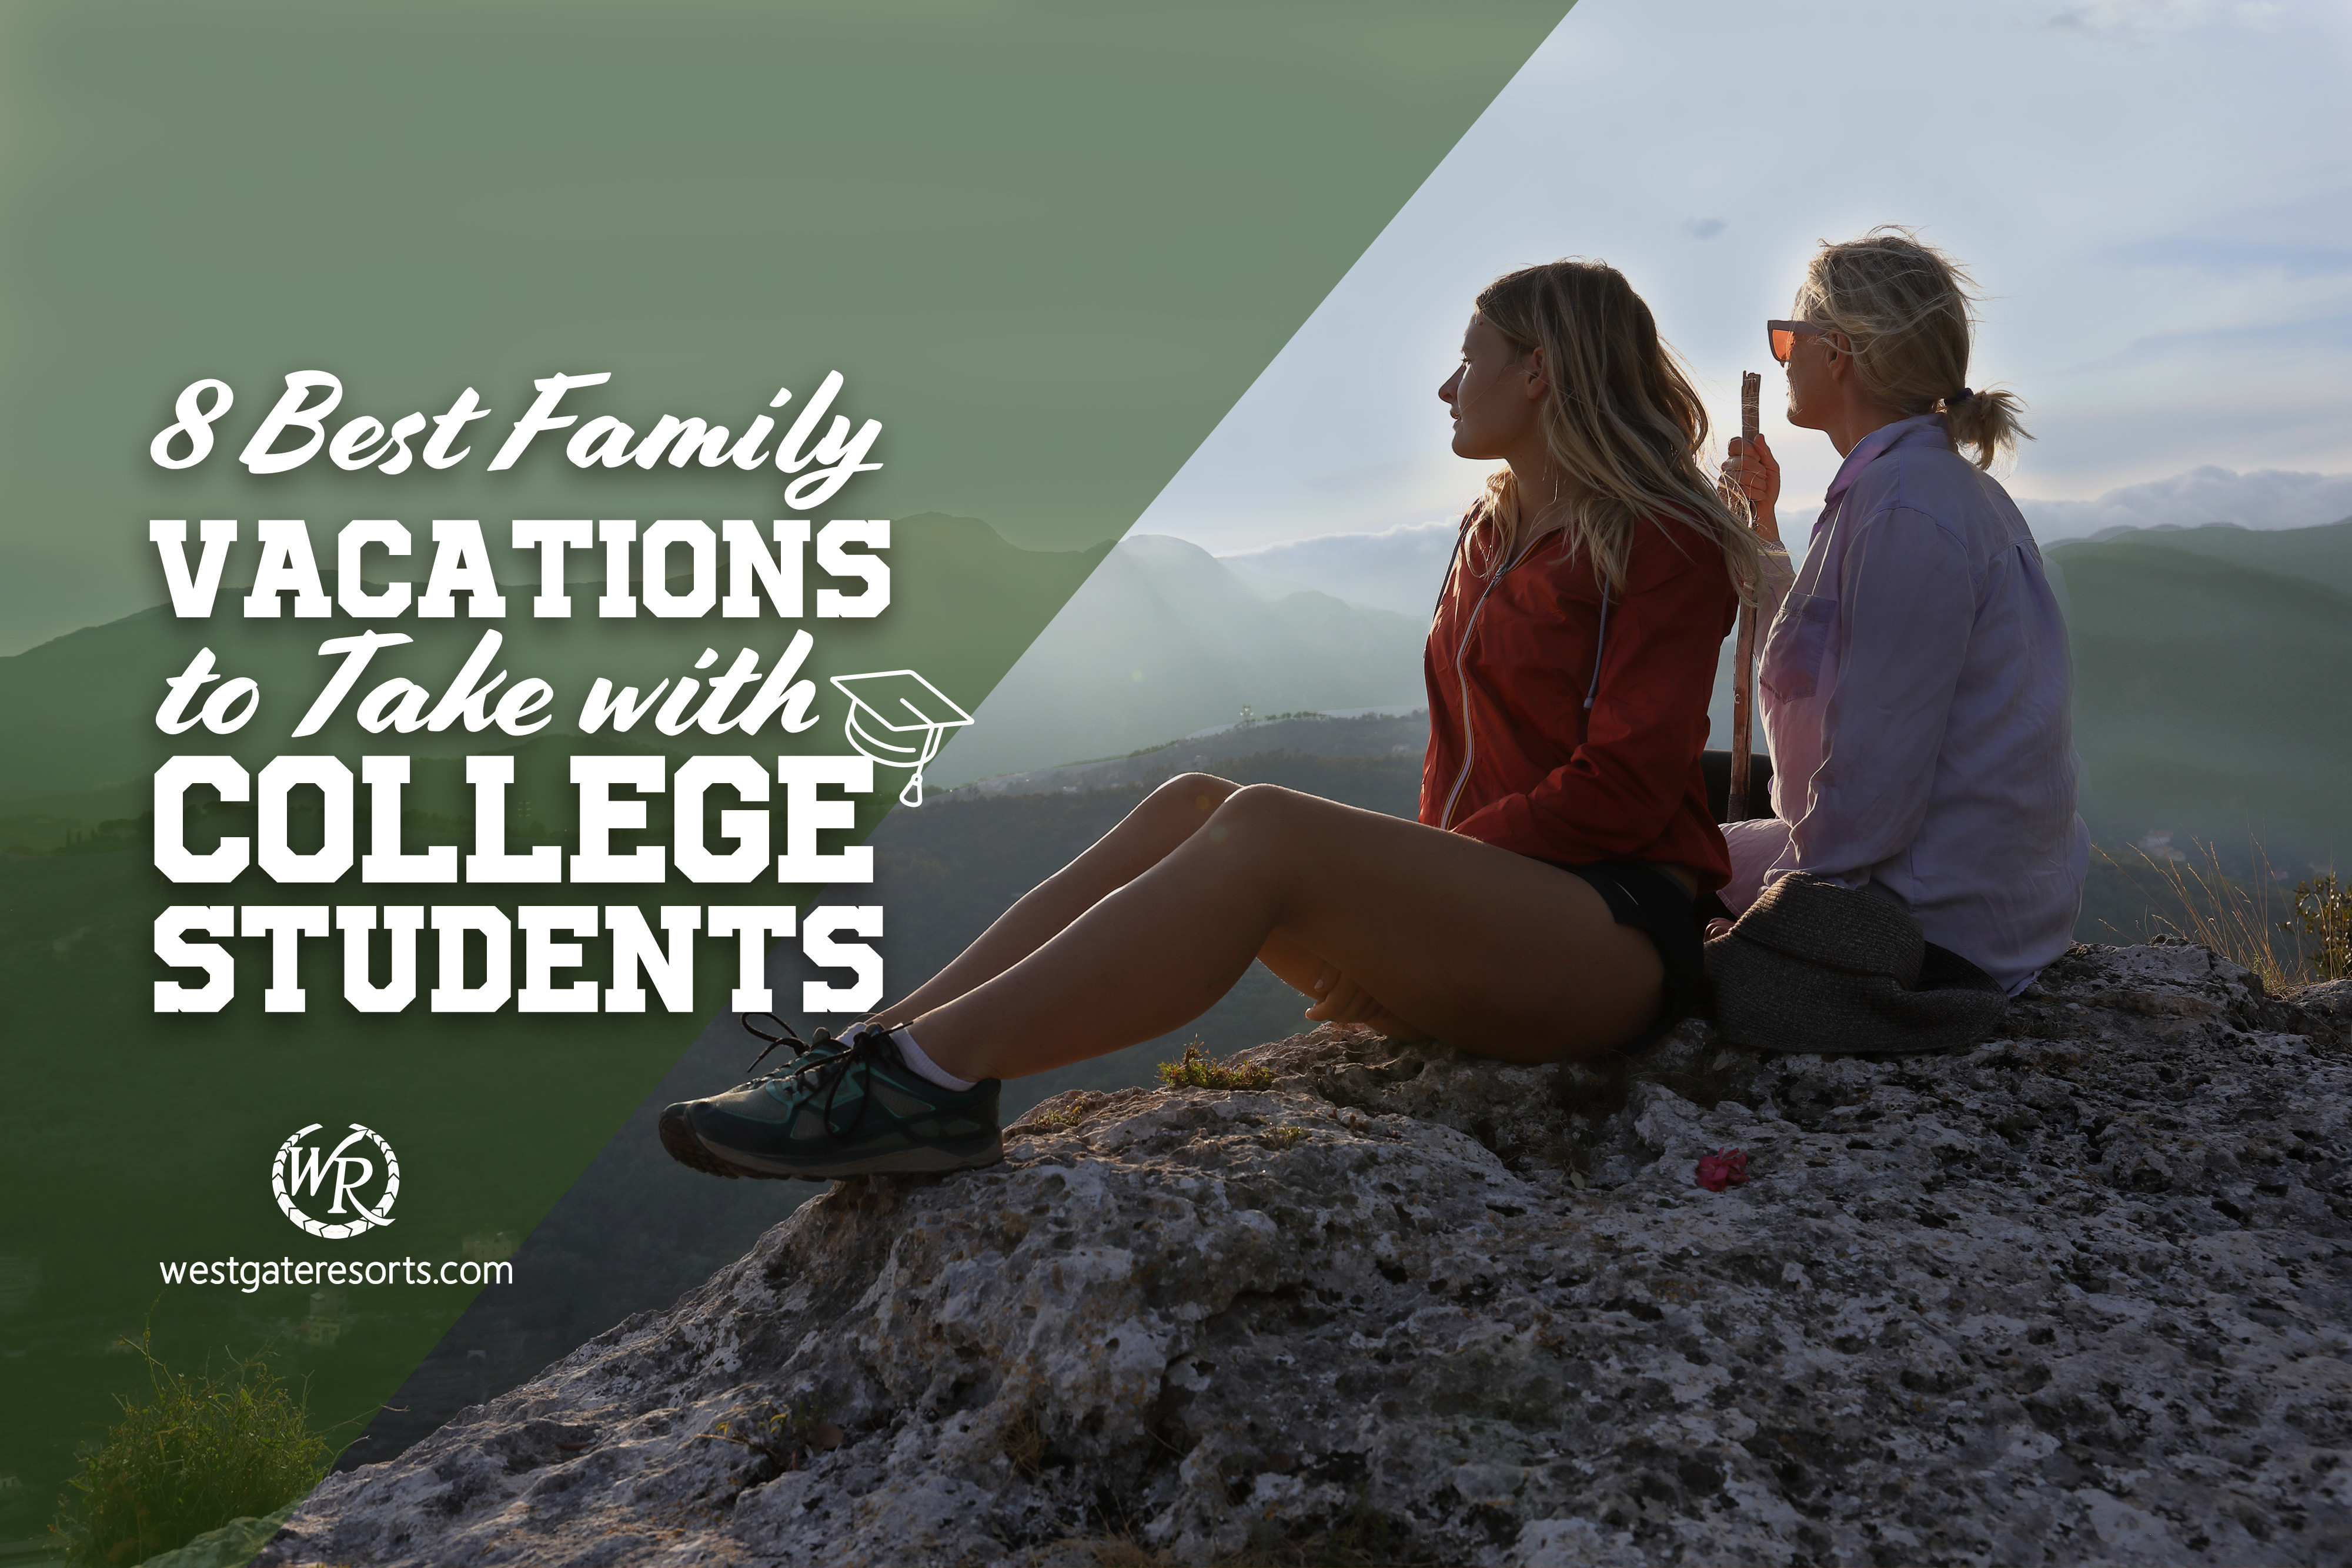 8 Great Family Vacations to Take With College Students!